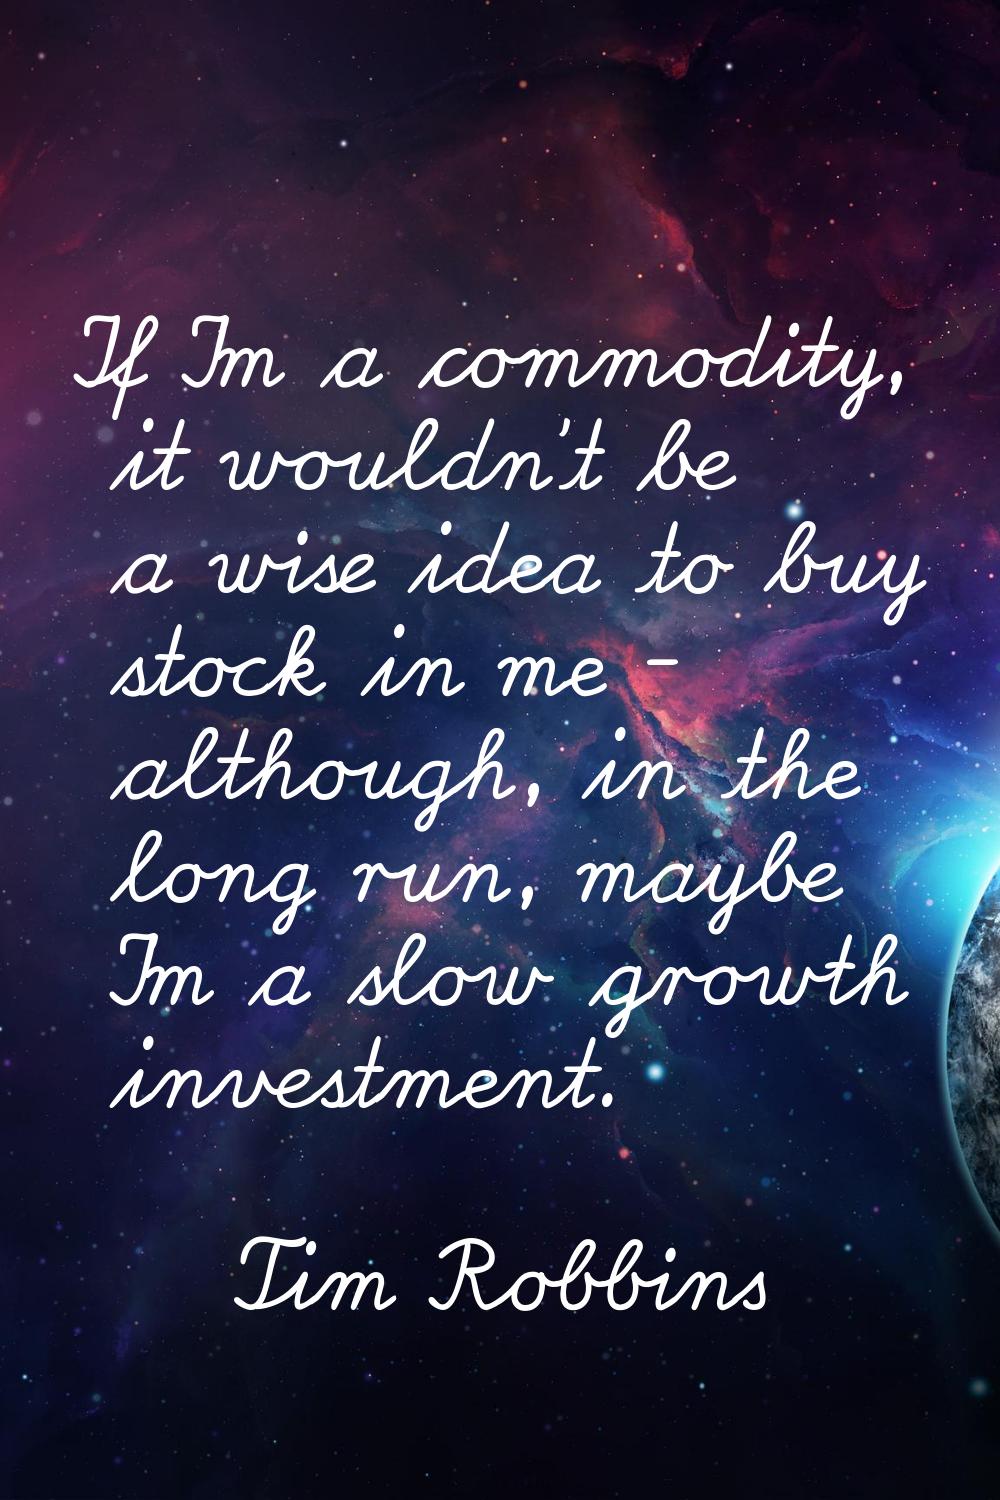 If I'm a commodity, it wouldn't be a wise idea to buy stock in me - although, in the long run, mayb